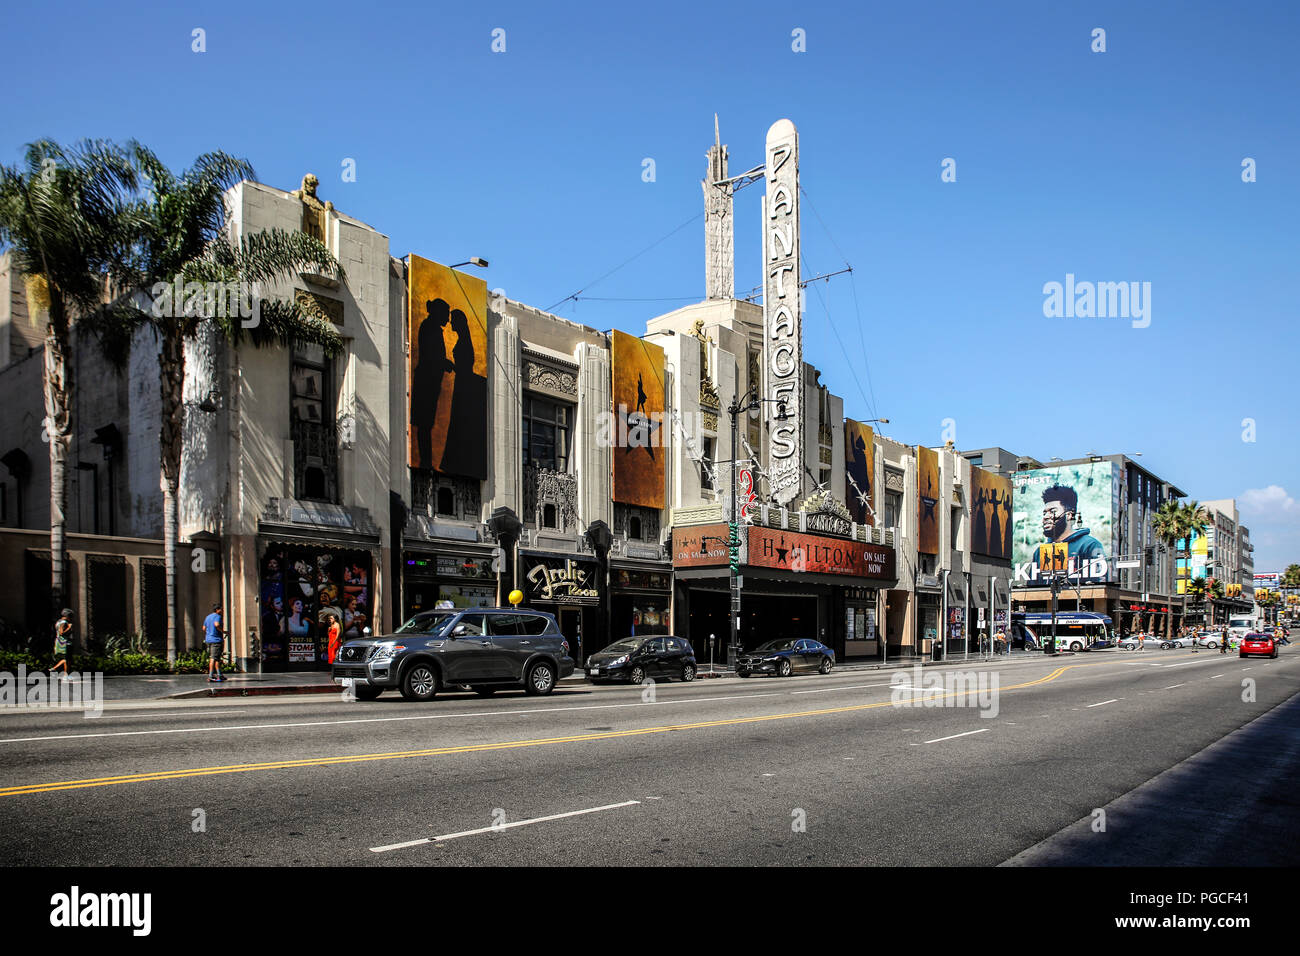 Los Angeles, United States of America - July 25, 2017: The Frolic Room bar is located next to the Pantages Theater and is the last bar on the Hollywood Boulevard. Stock Photo